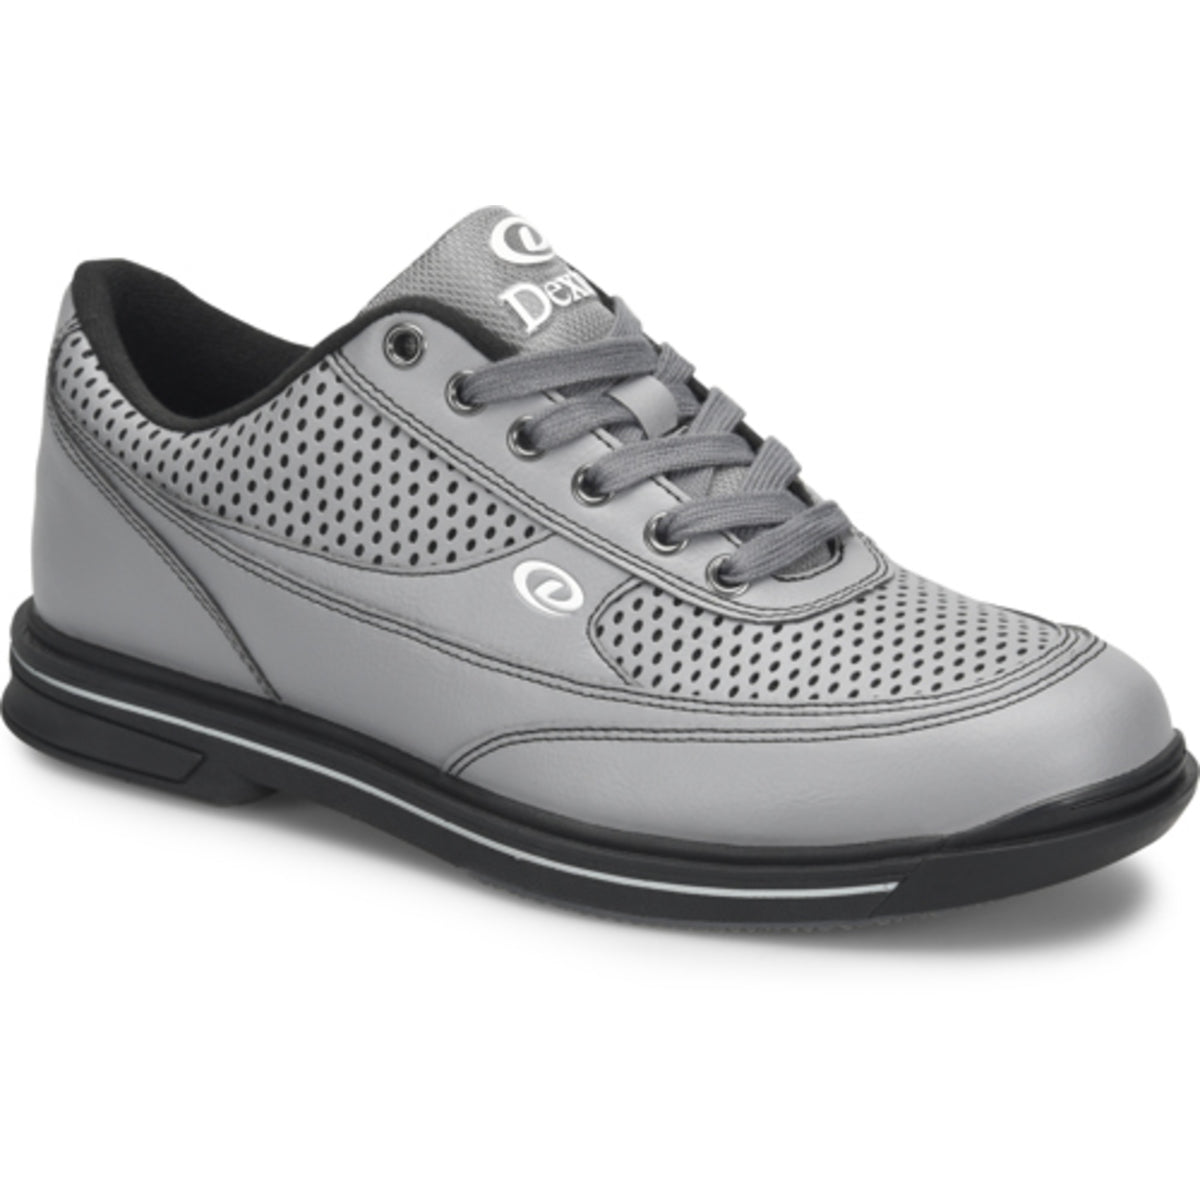 Turbo Tour Steel Wide Shoes